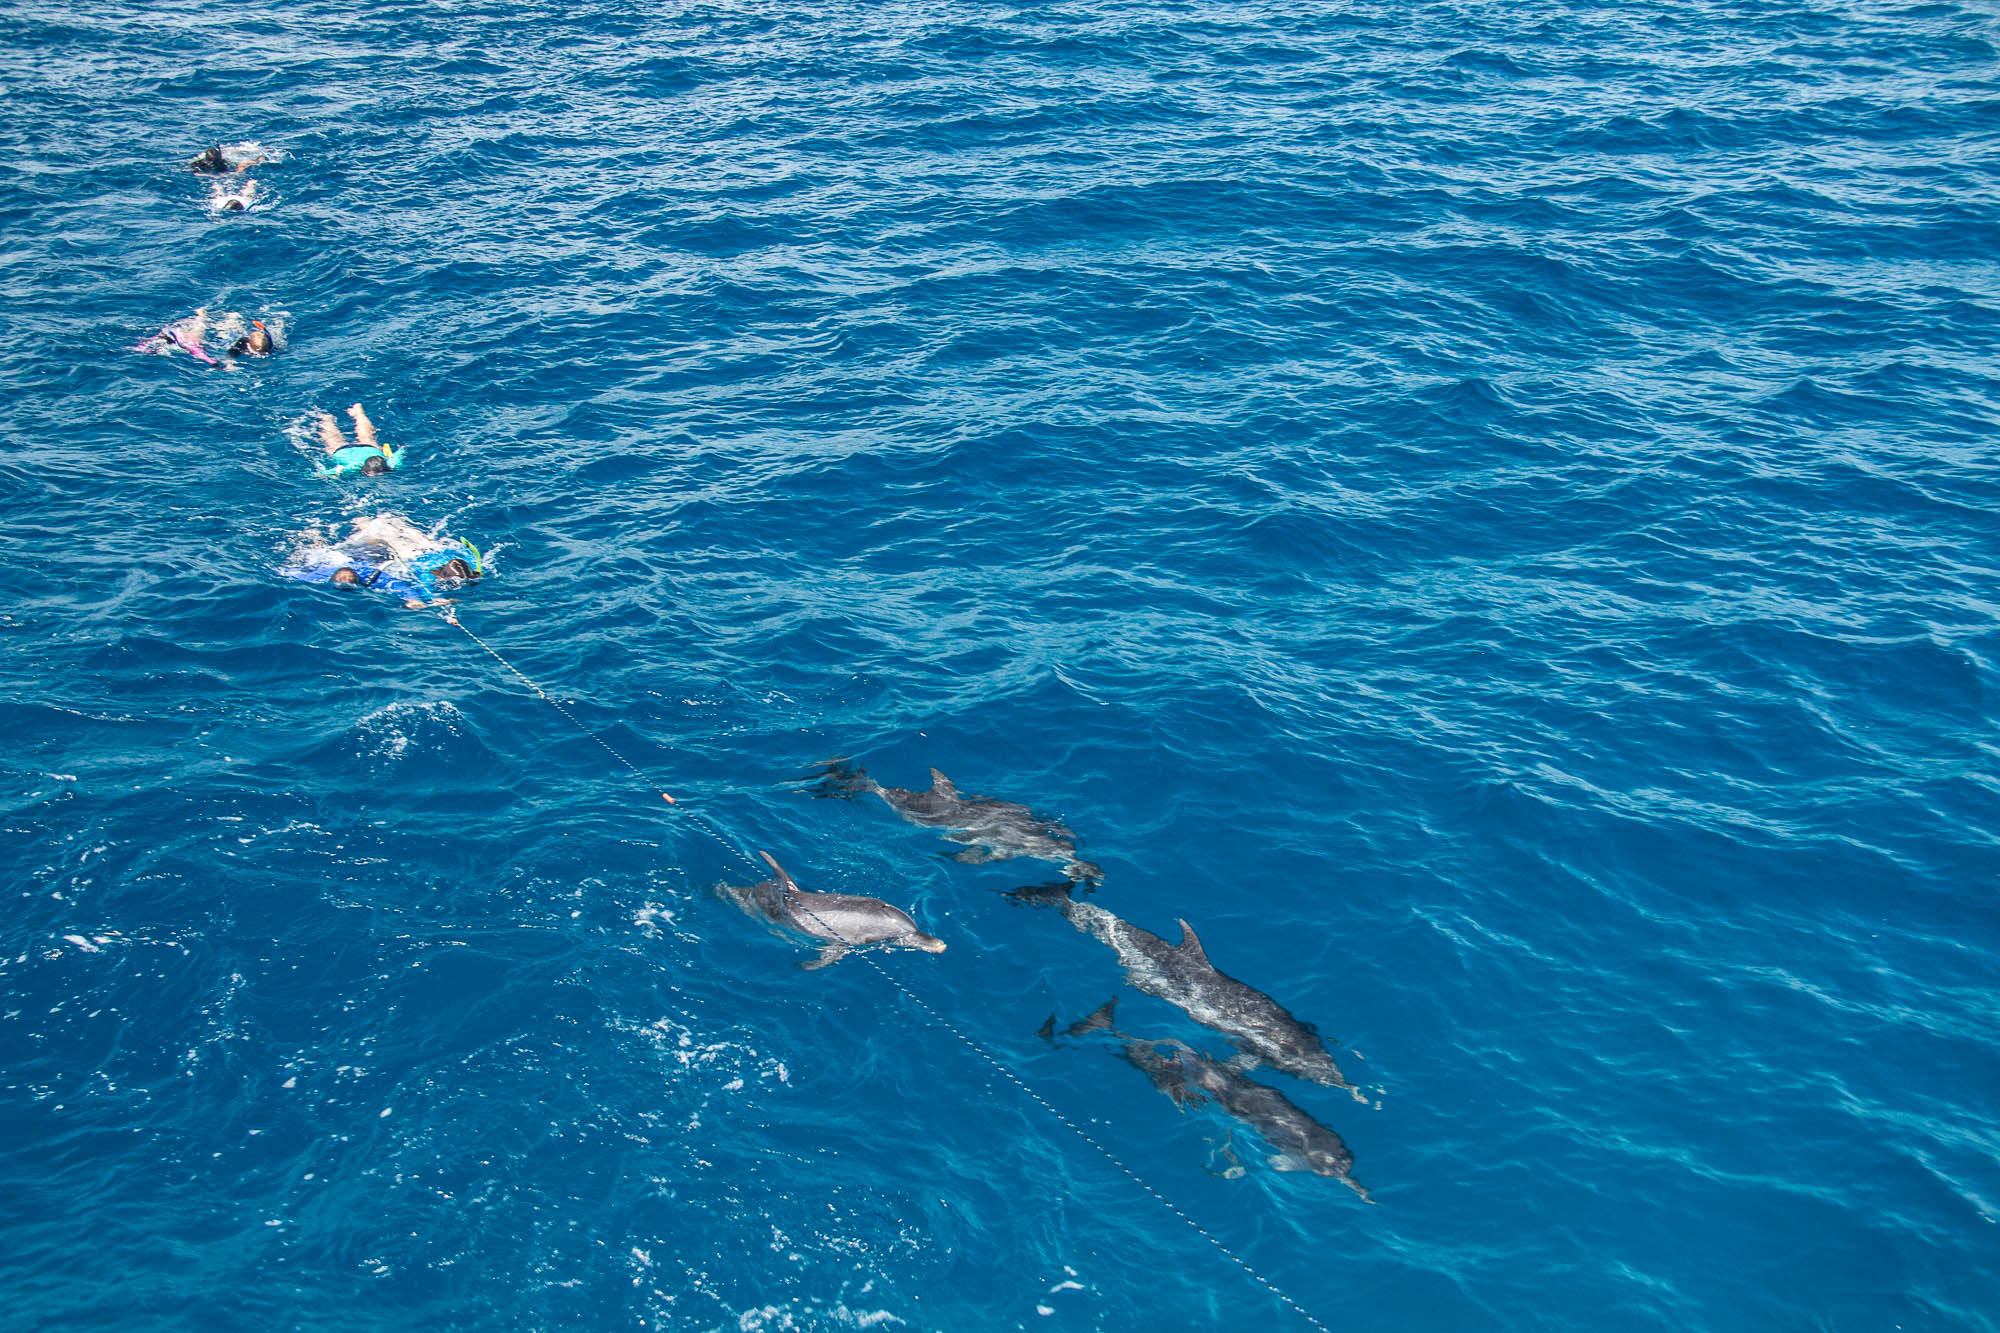 Being pulled on a rope from the boat to follow dolphins.